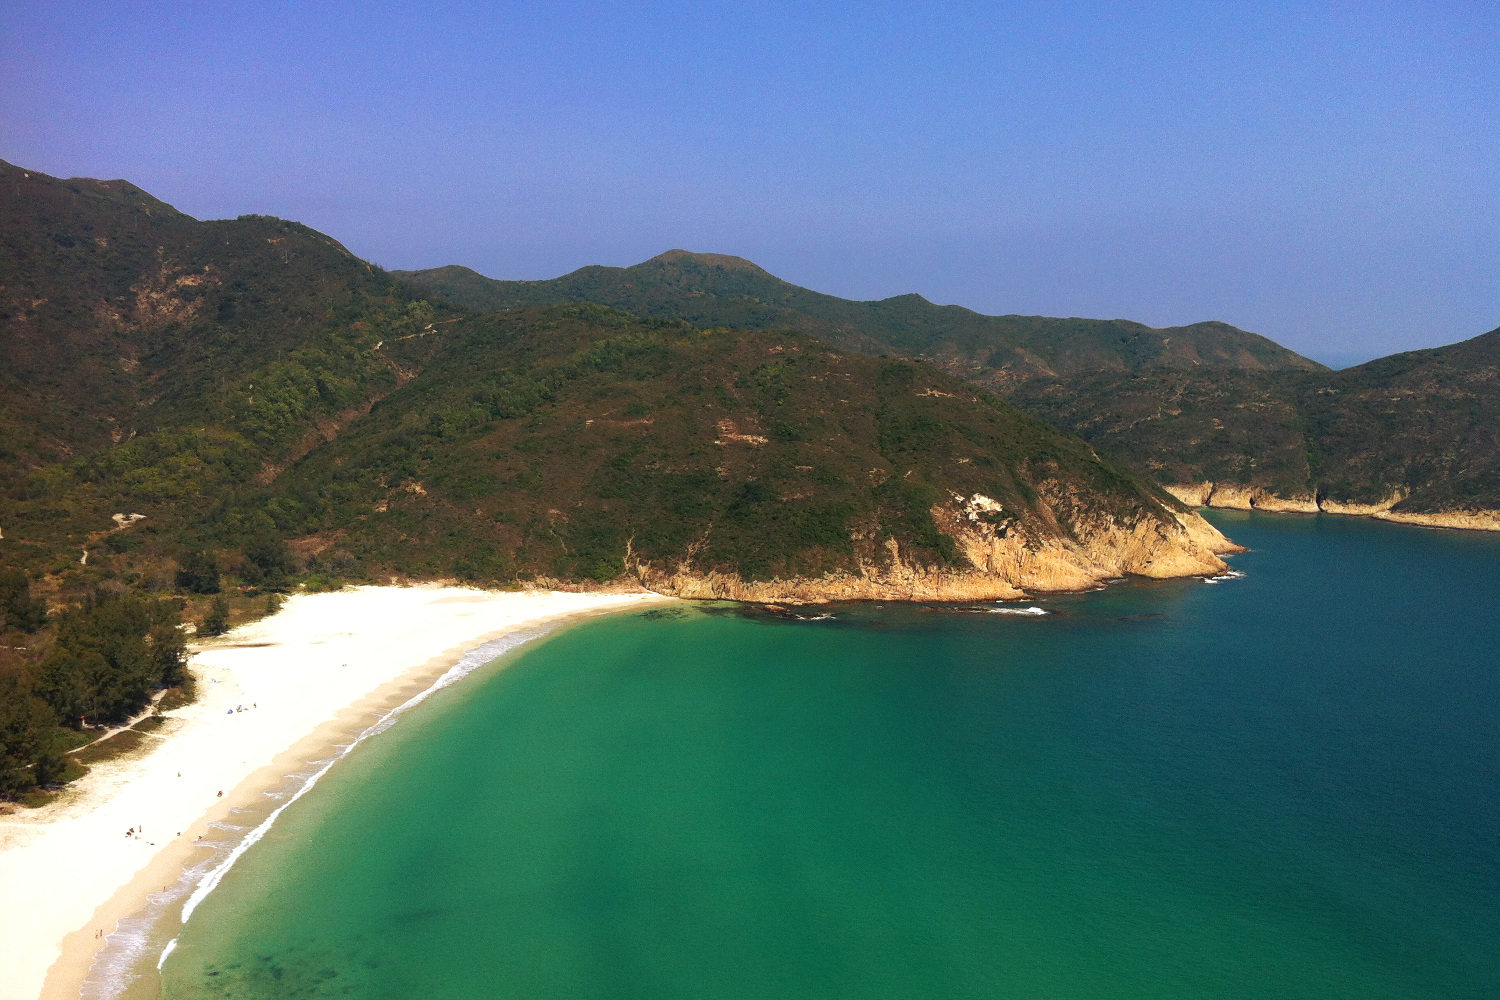 A quiet beach in Sai Kung. Image by Piera Chen / Lonely Planet